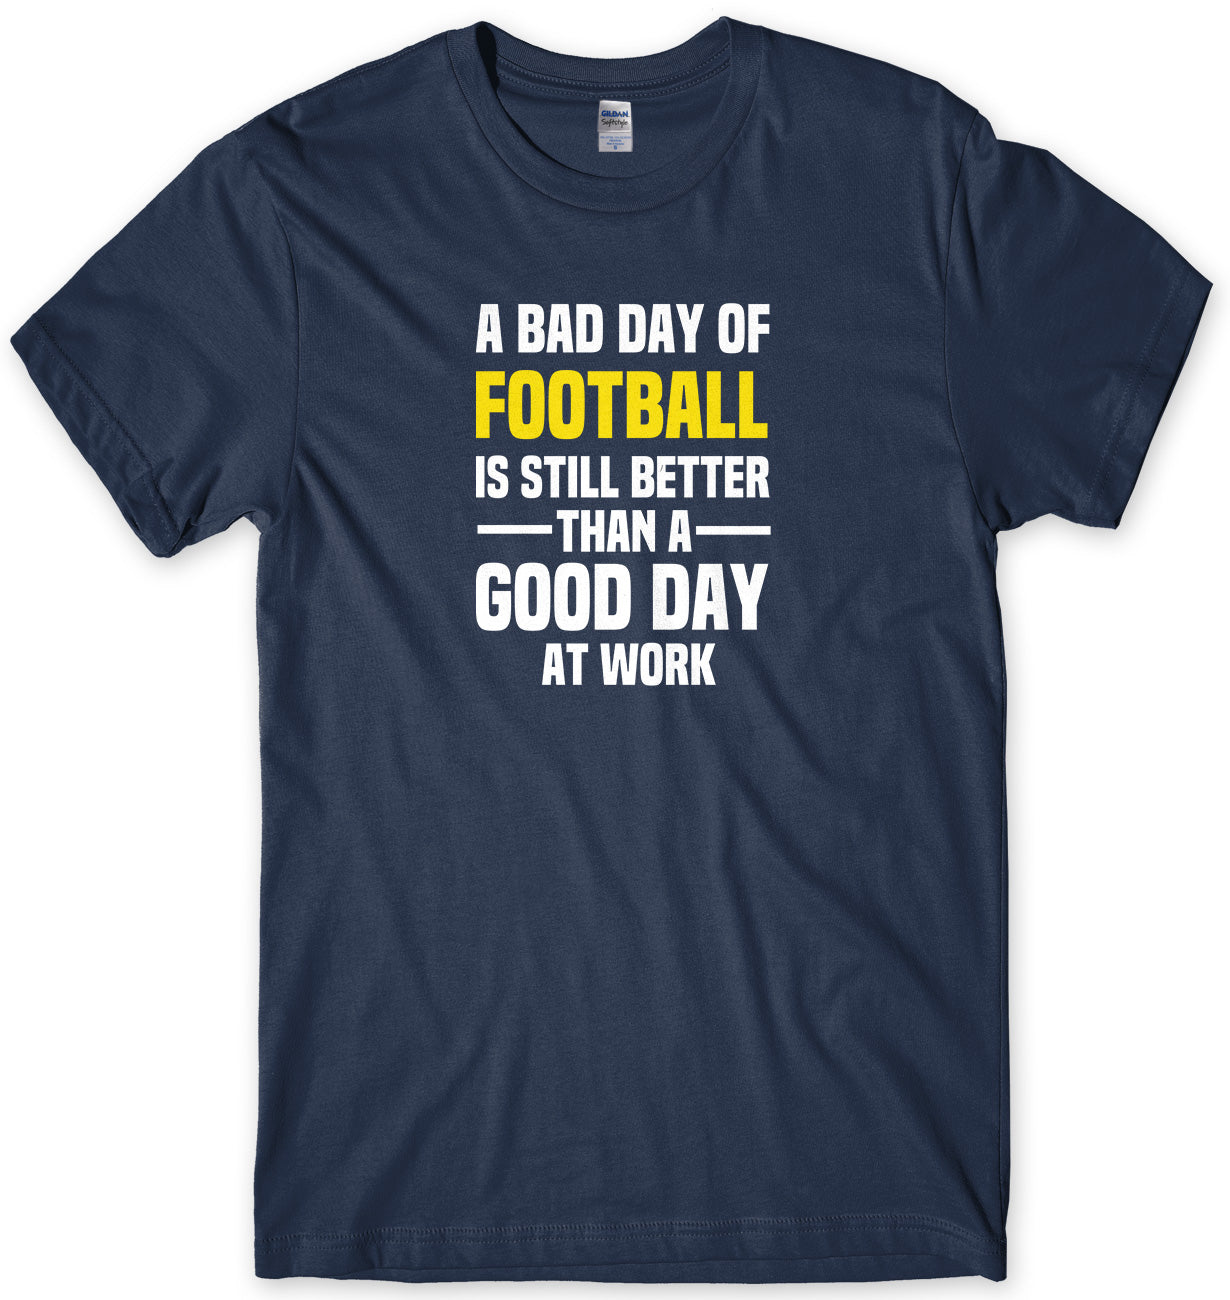 A BAD DAY OF FOOTBALL IS STILL BETTER THAN A GOOD DAY AT WORK MENS FUNNY SLOGAN UNISEX T-SHIRT - StreetSide Surgeons